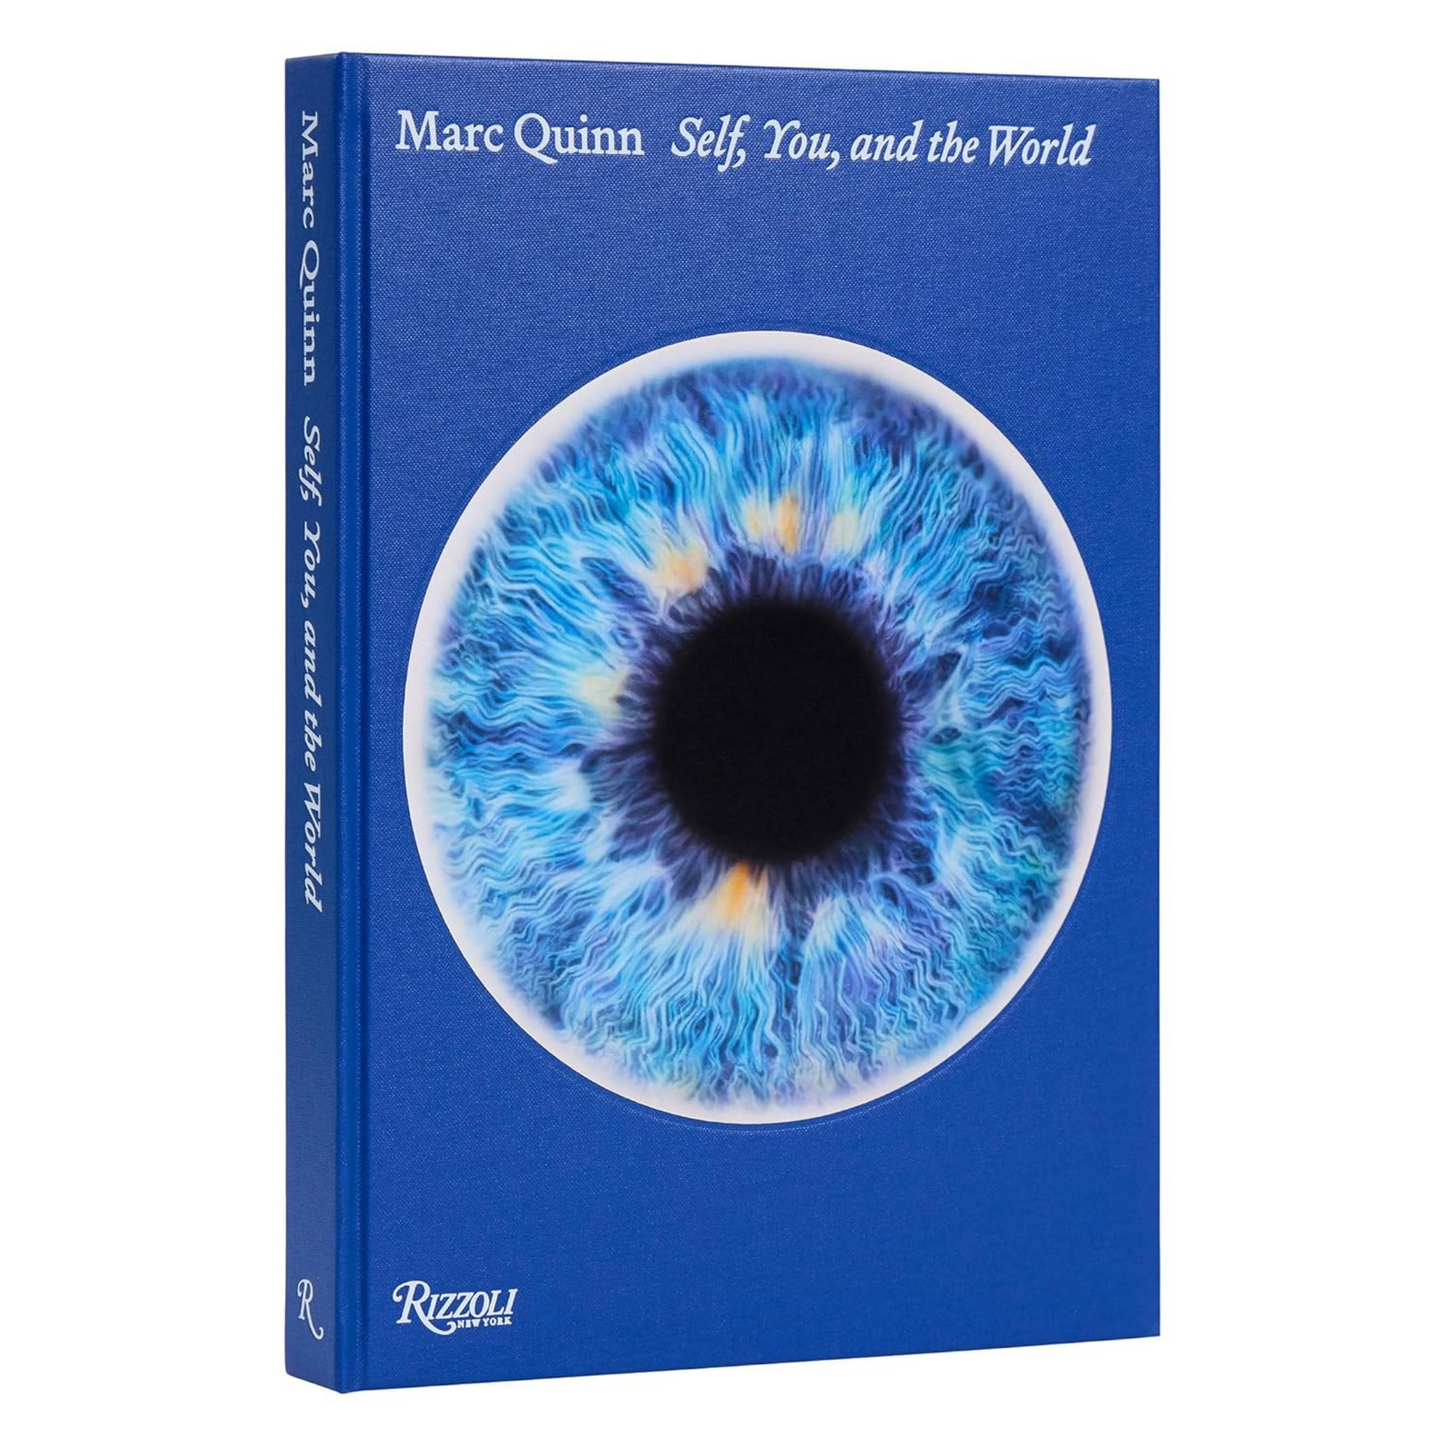 Cover of Marc Quinn book, blue with large eye pupil and blue iris.